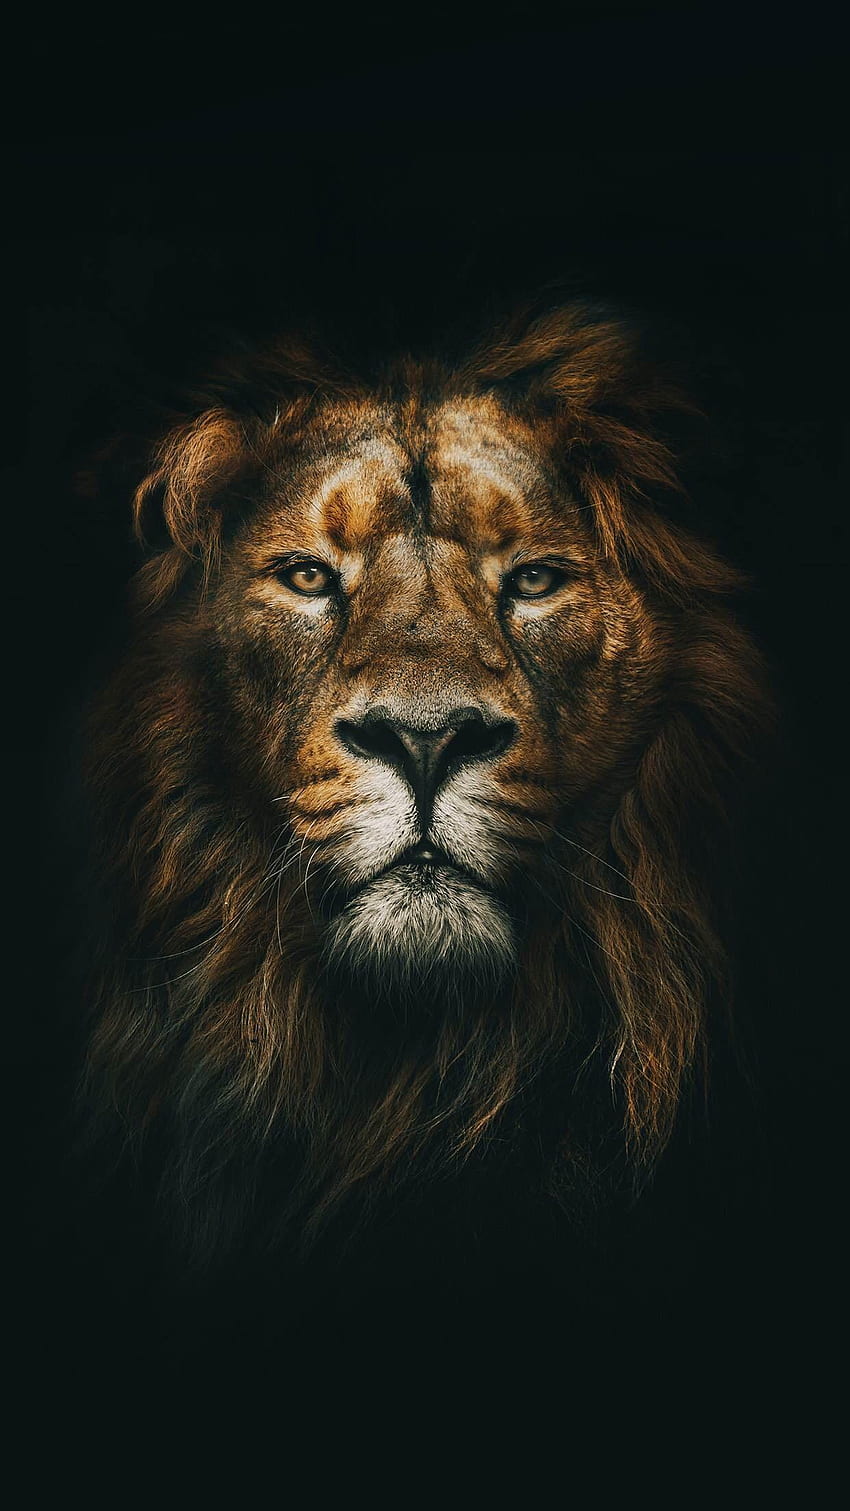 Cool Collection of Wallpaper iPhone Lion for a wild Home Screen